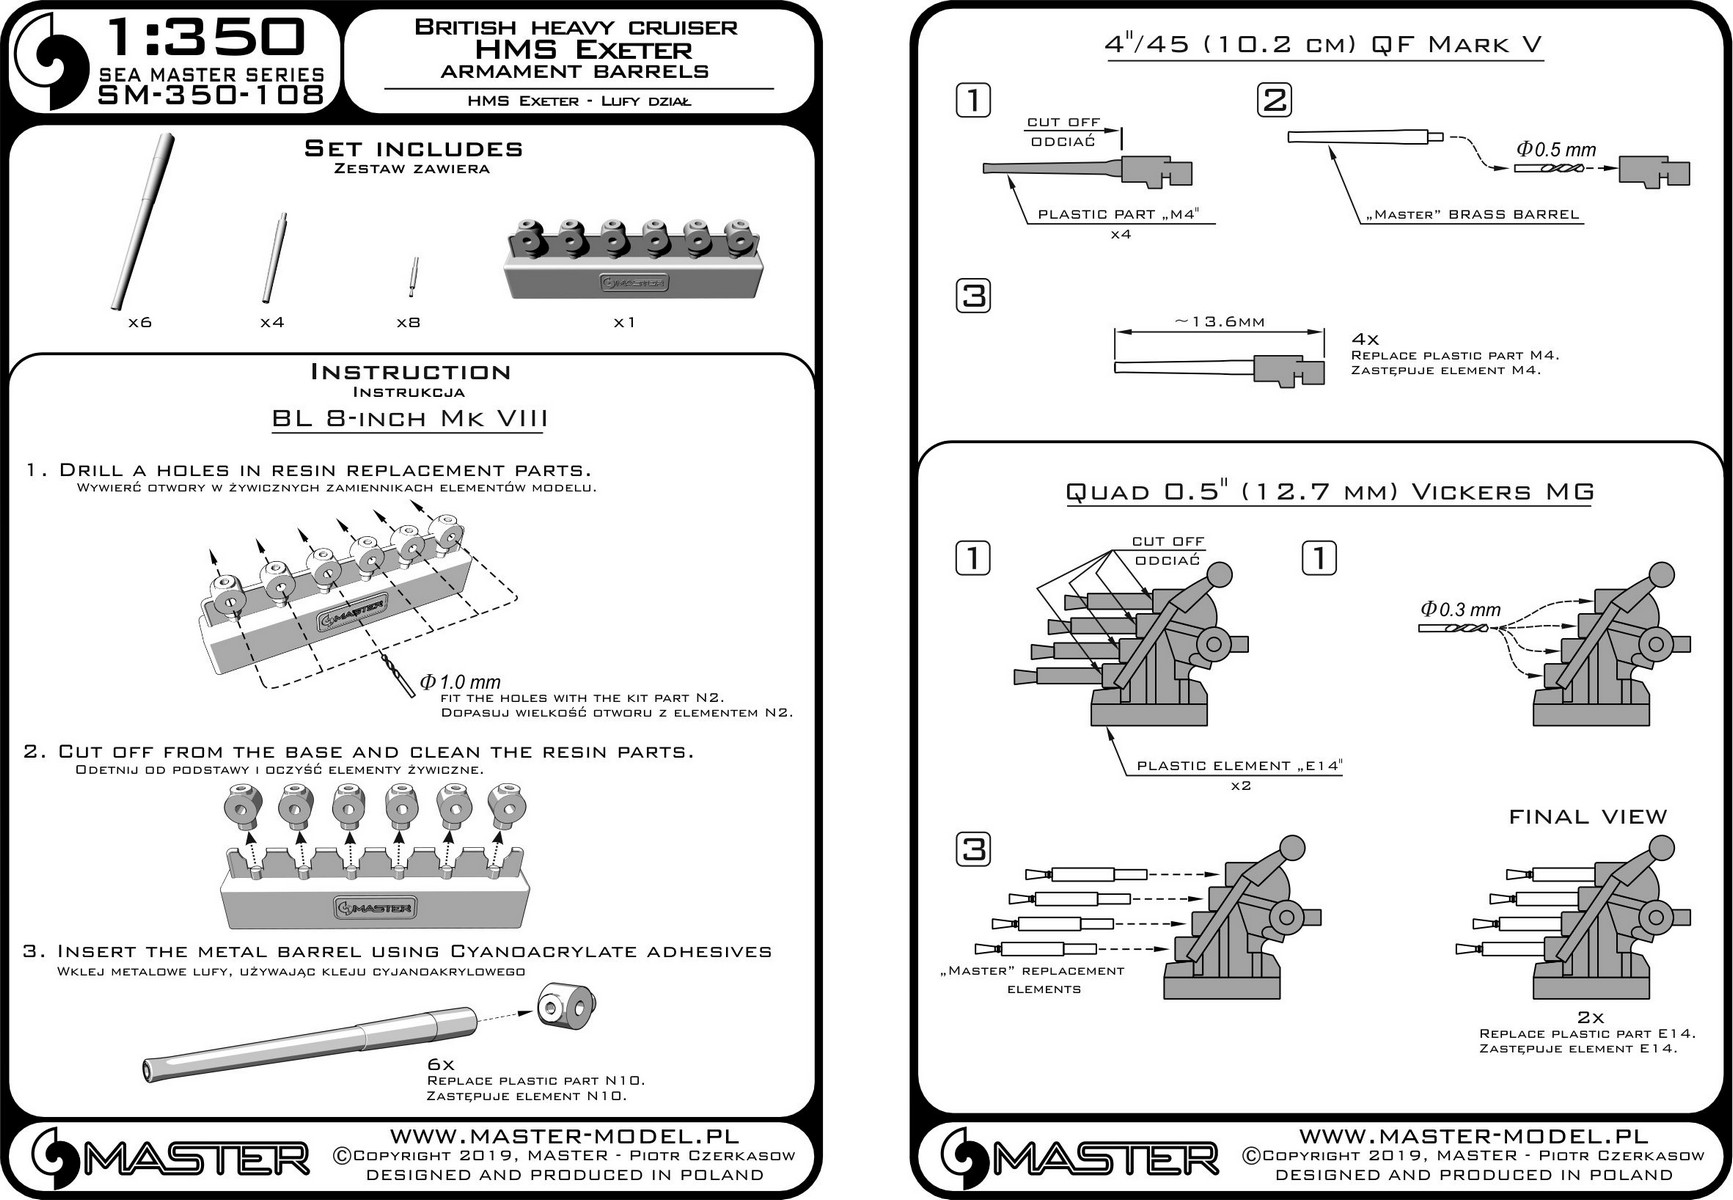 1/350 HMS Exeter 1939 Armament Barrels (8in, 4in, Vickers 0.5in) - Click Image to Close